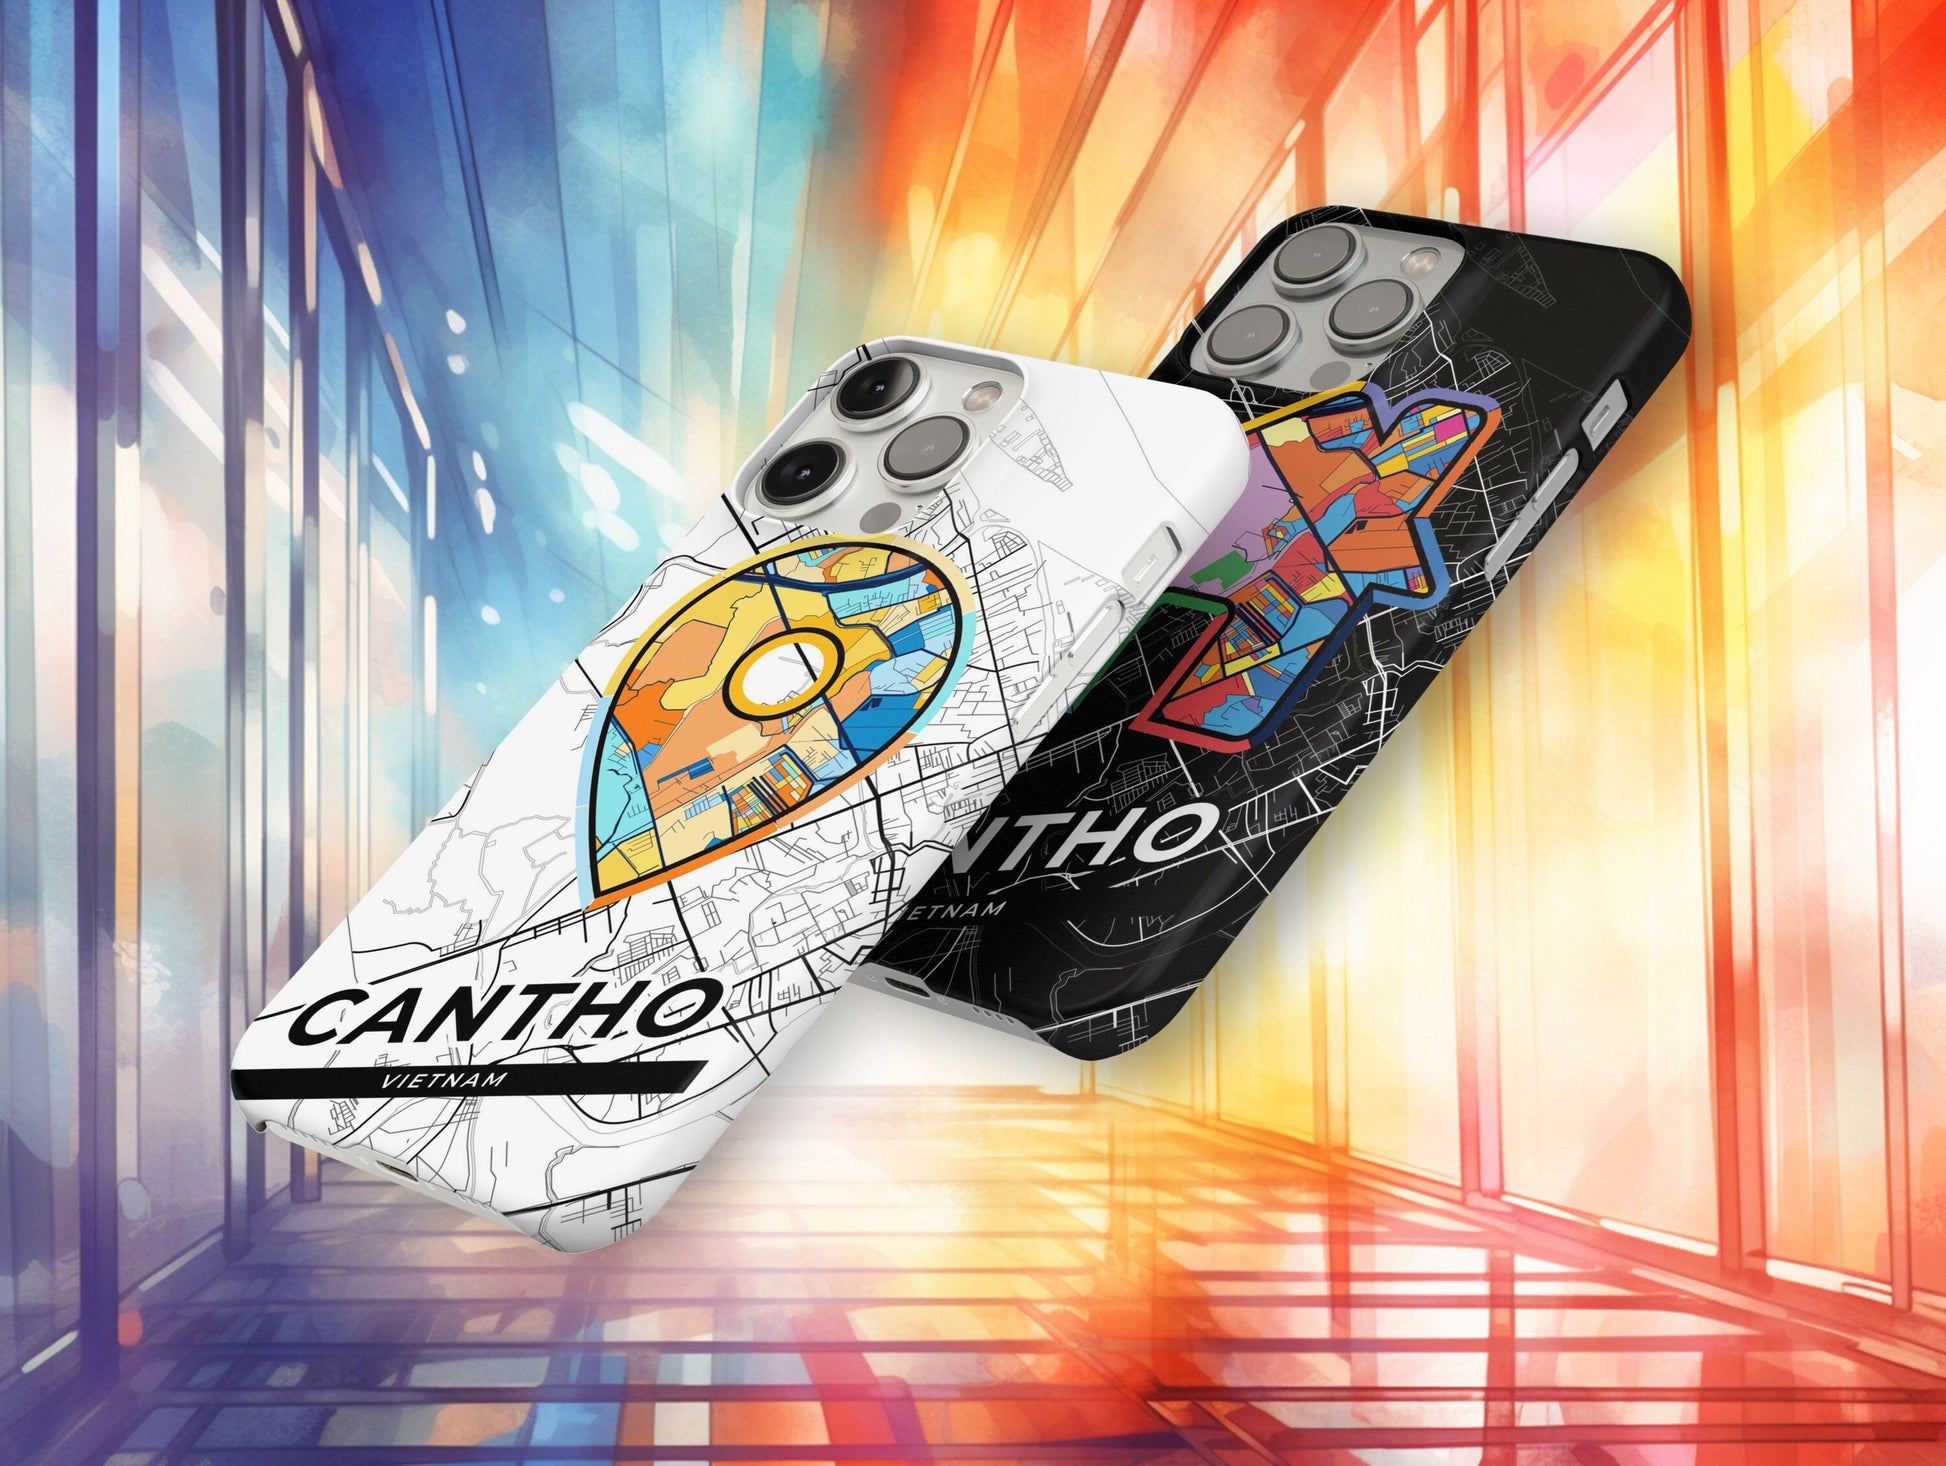 Cantho Vietnam slim phone case with colorful icon. Birthday, wedding or housewarming gift. Couple match cases.